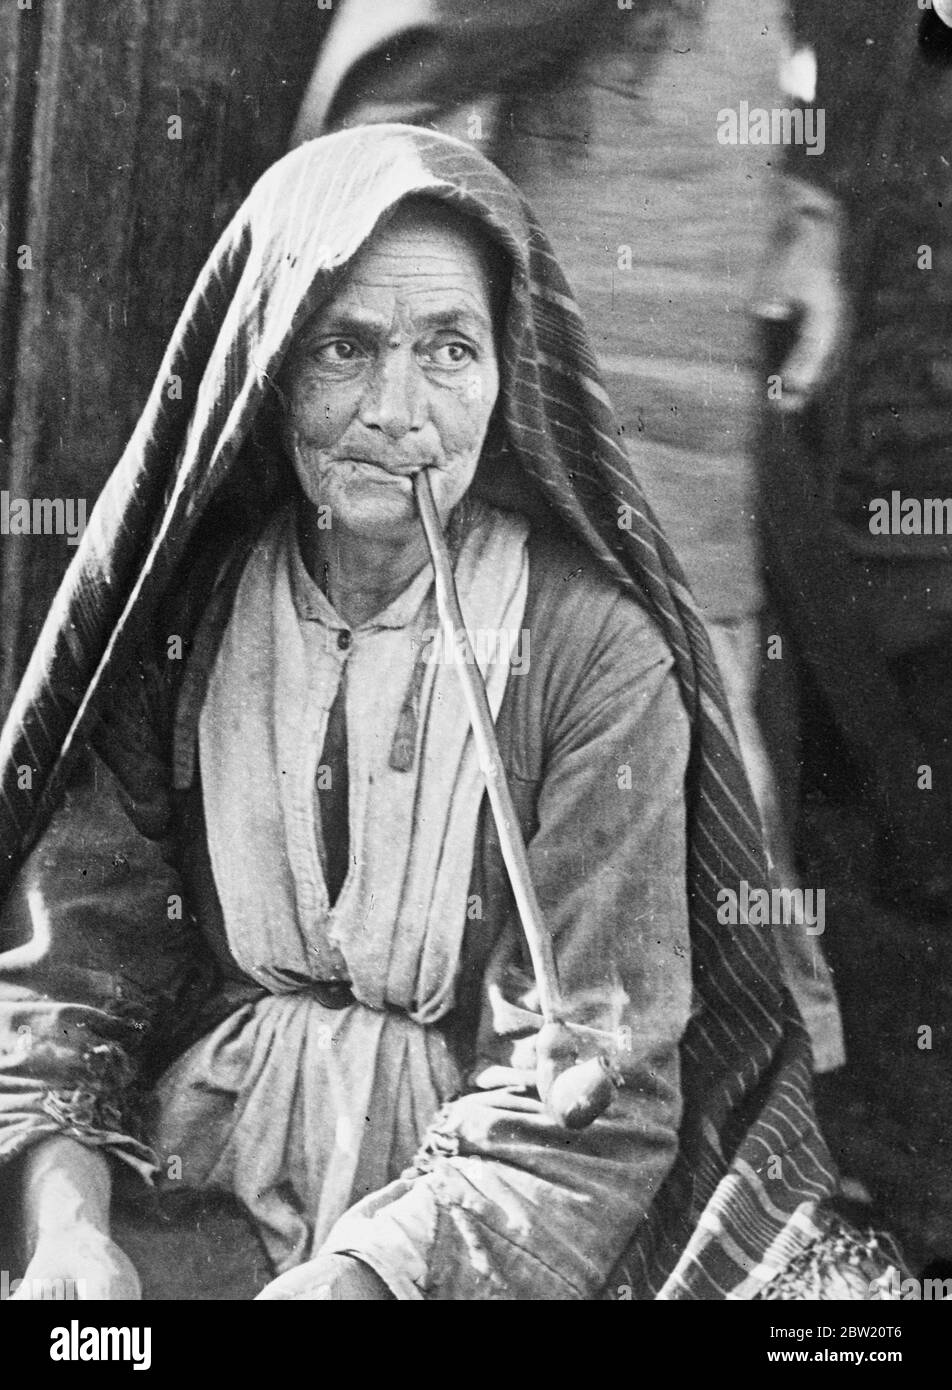 Elderly Jewish woman pipe addict of a Russian ghetto dressed in coarse cloths and shawl. She is contentedly smoking her long pipe, rudely made from wood, in the ghetto of Derbent / Derbend, Dagestan Republic on the shores of the Caspian Sea USSR. 9 July 1937 Stock Photo